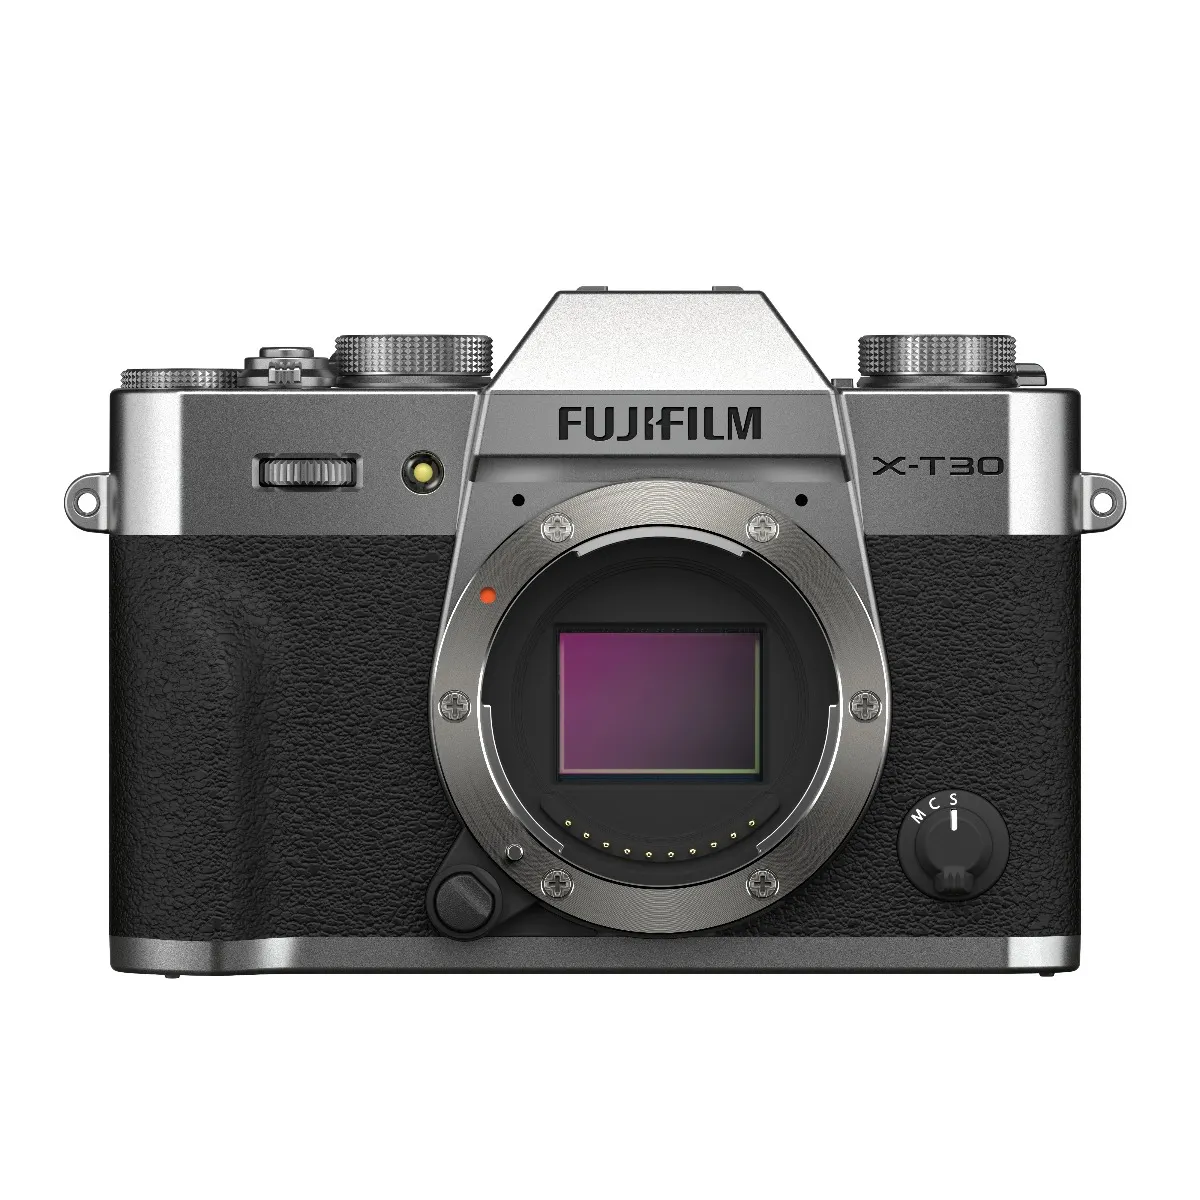 Image of Fujifilm X-T30 Type II Silver Body Only Compact System Camera